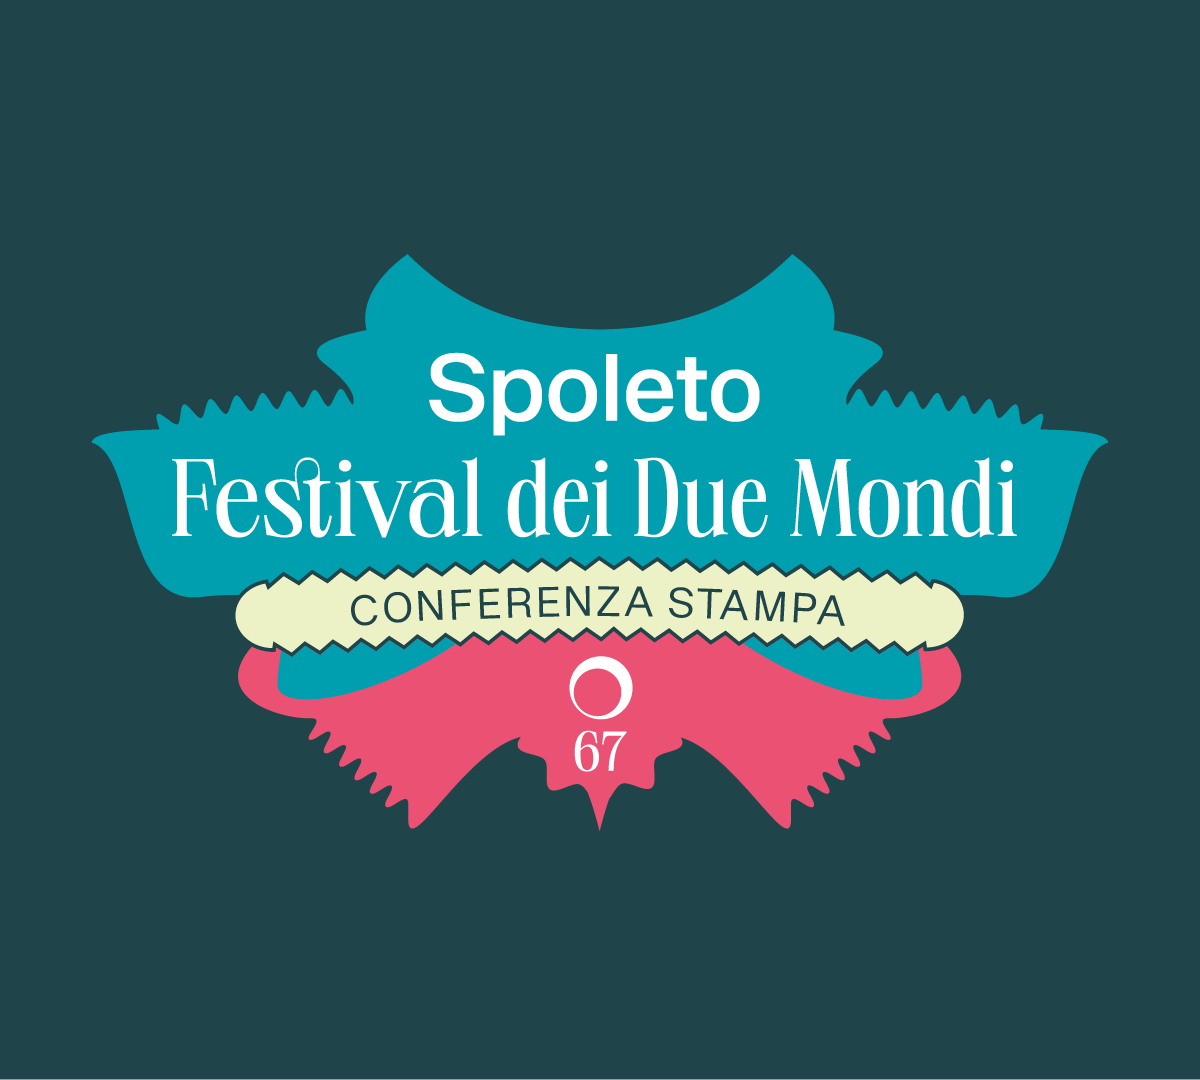 #Spoleto67 is coming🎆 On 13 March at 11.30 a.m. there will be the presentation of the new edition of the Festival dei Due Mondi at the Ministry of Culture in Rome. Follow the live streaming on MiC's YouTube channel and on the website festivaldispoleto.com